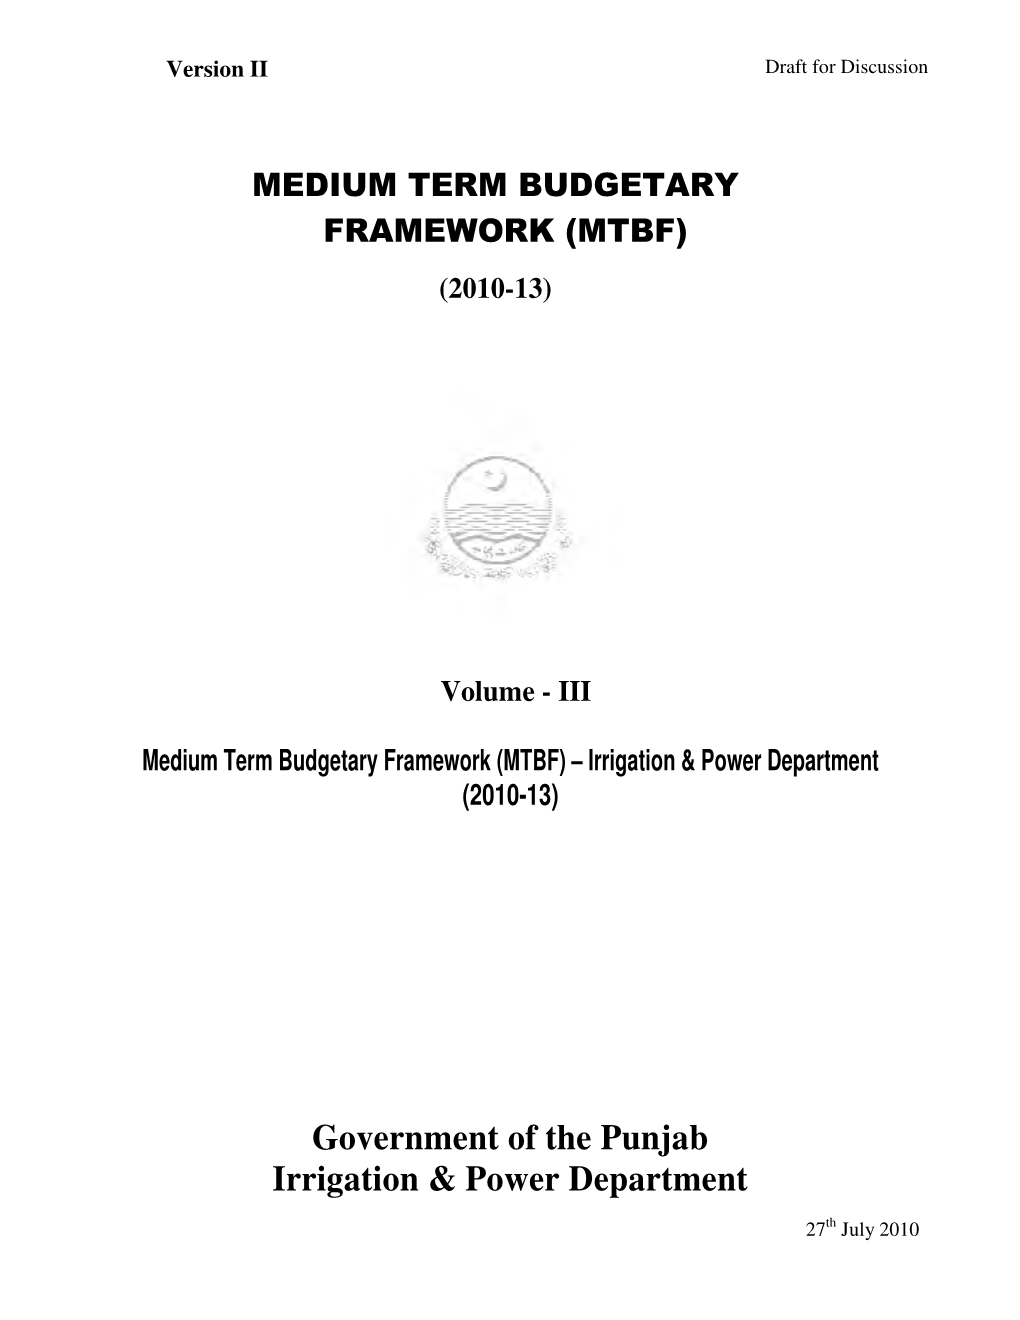 Government of the Punjab Irrigation & Power Department